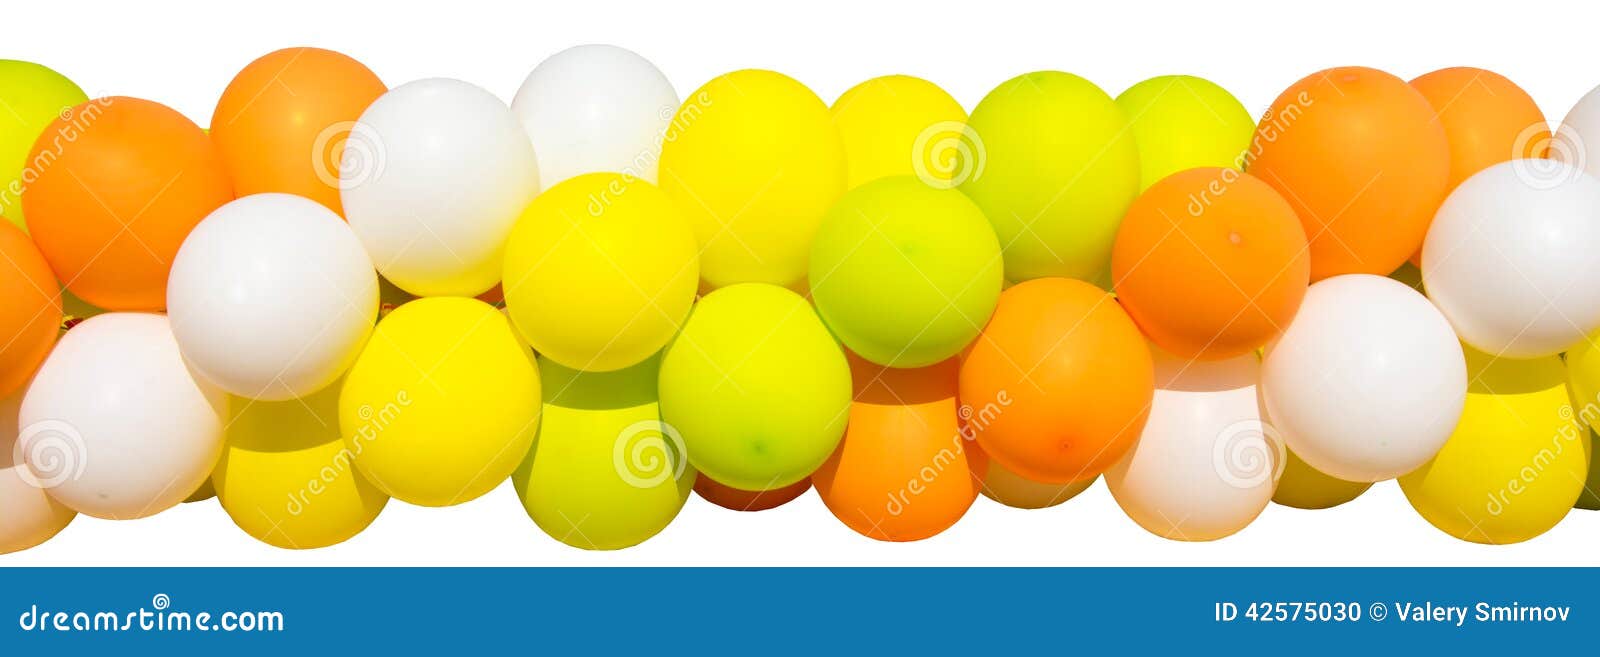 https://thumbs.dreamstime.com/z/string-balloons-garland-bright-colorful-white-background-42575030.jpg